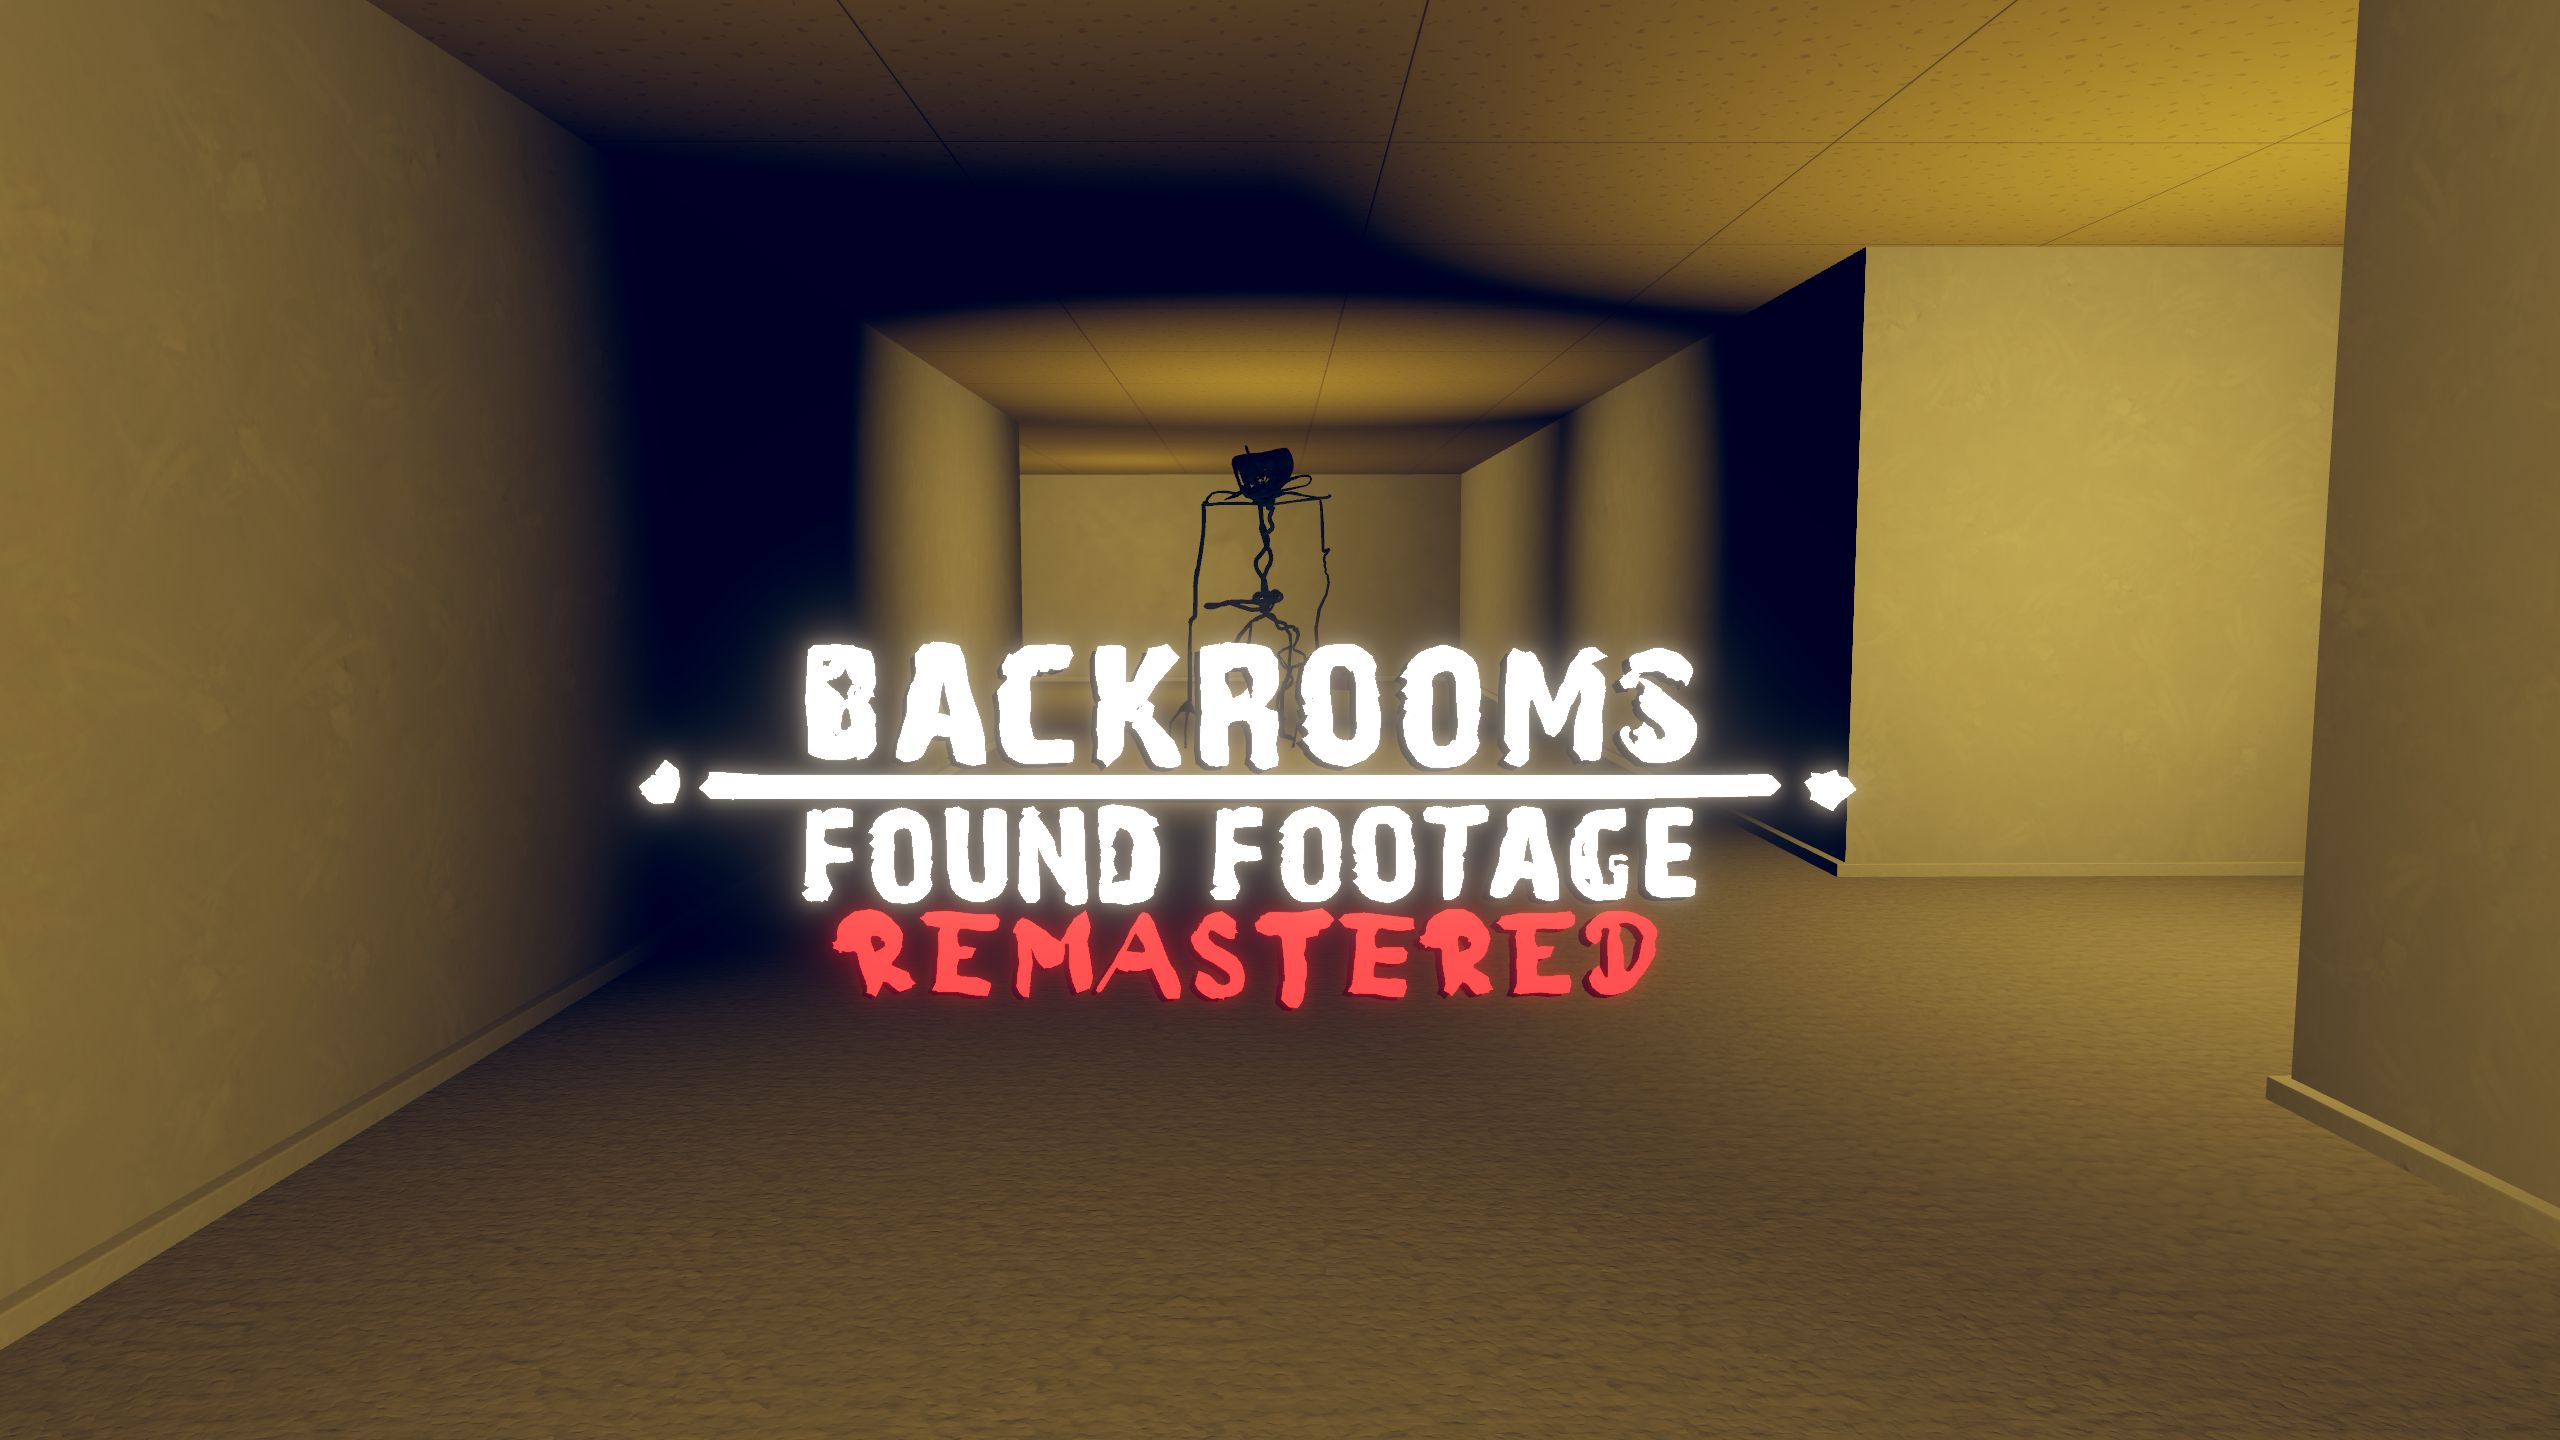 The Backrooms - Level 4 (Found Footage) 